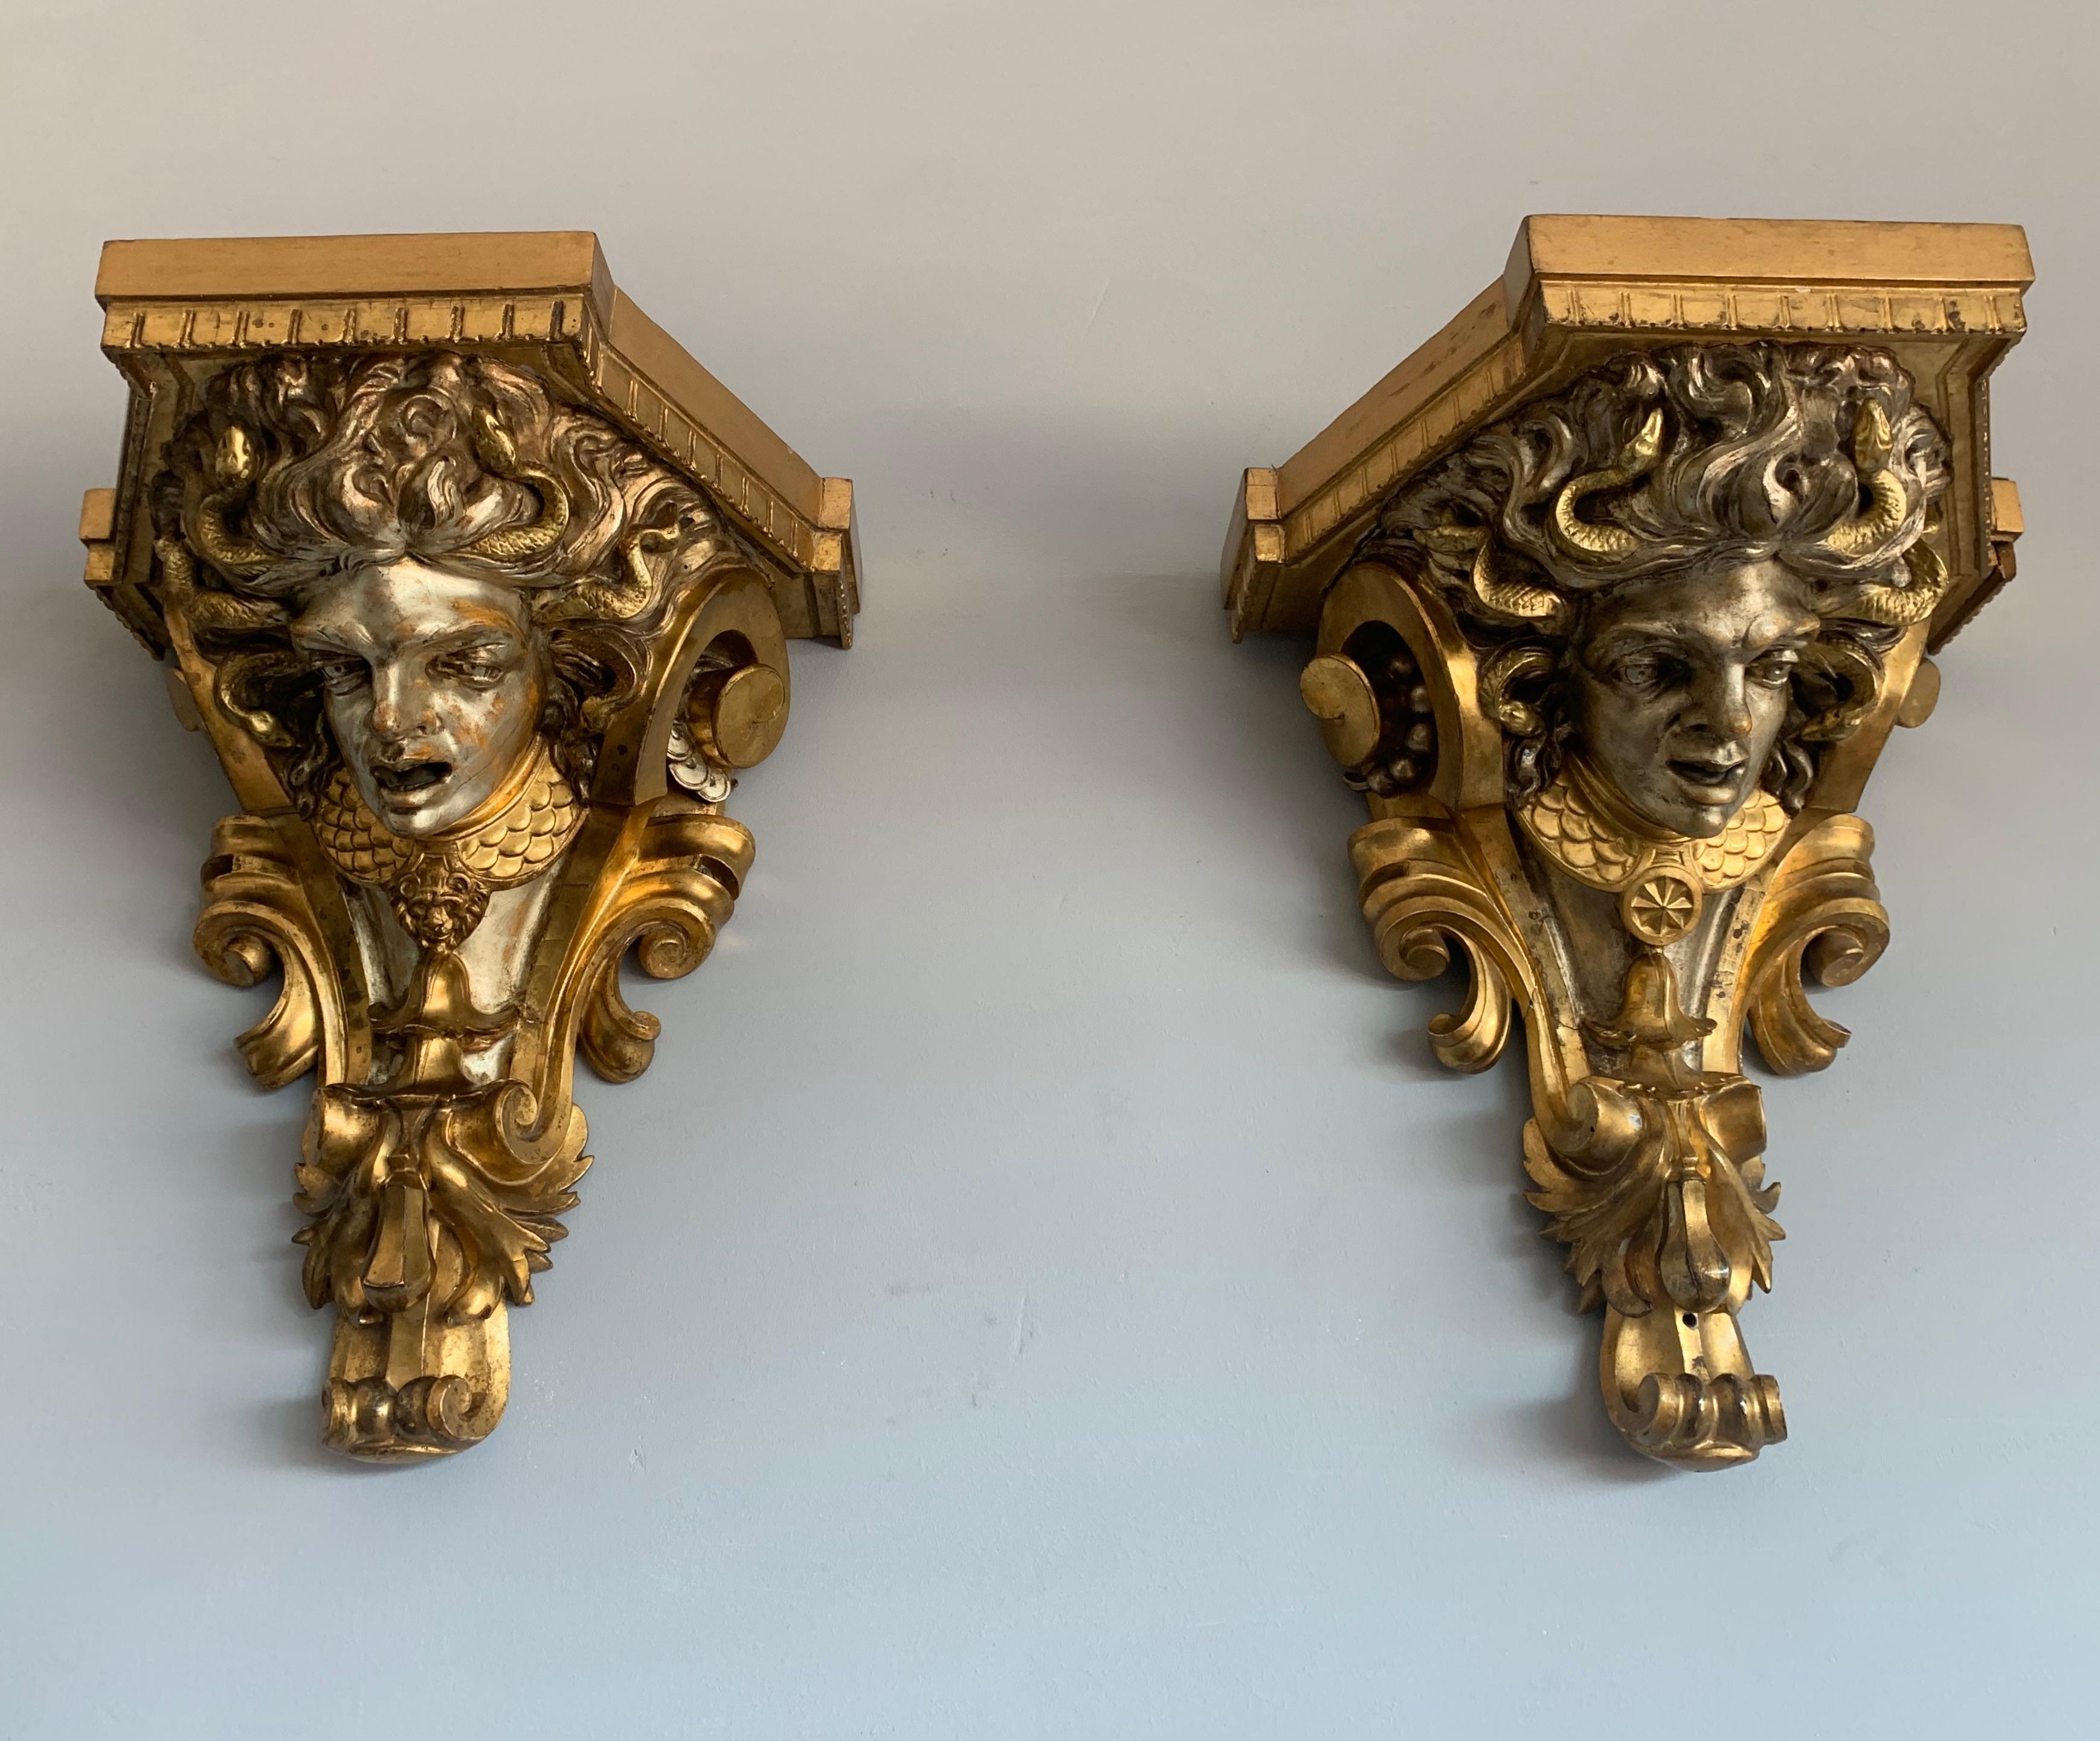 Walnut Rare and Antique Pair of Carved Gilt and Silvered Medusa Sculpture Wall Brackets